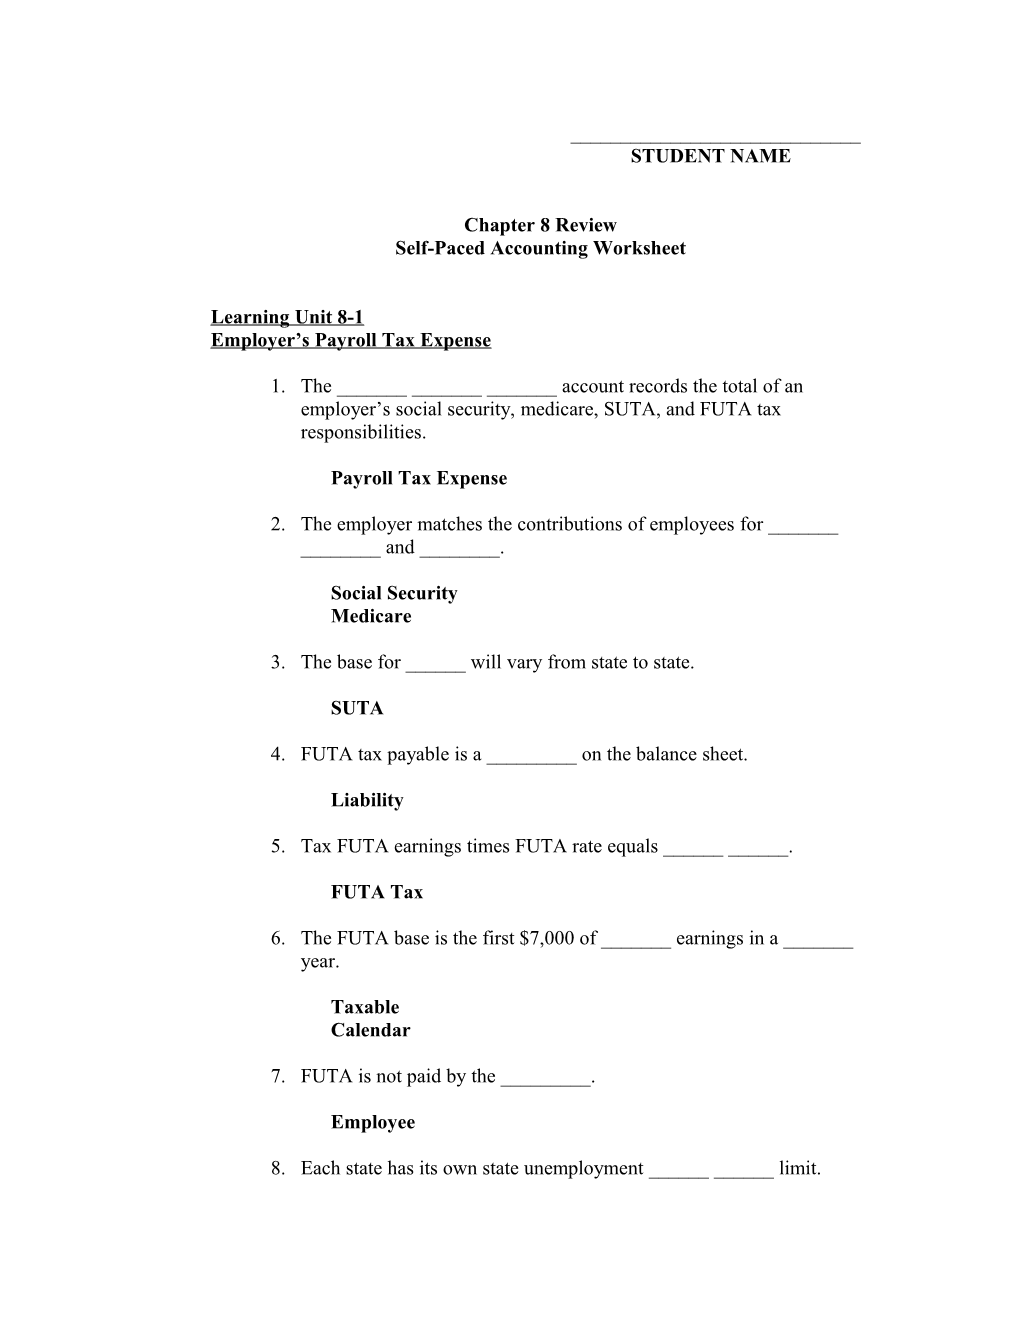 Self-Paced Accounting Worksheet